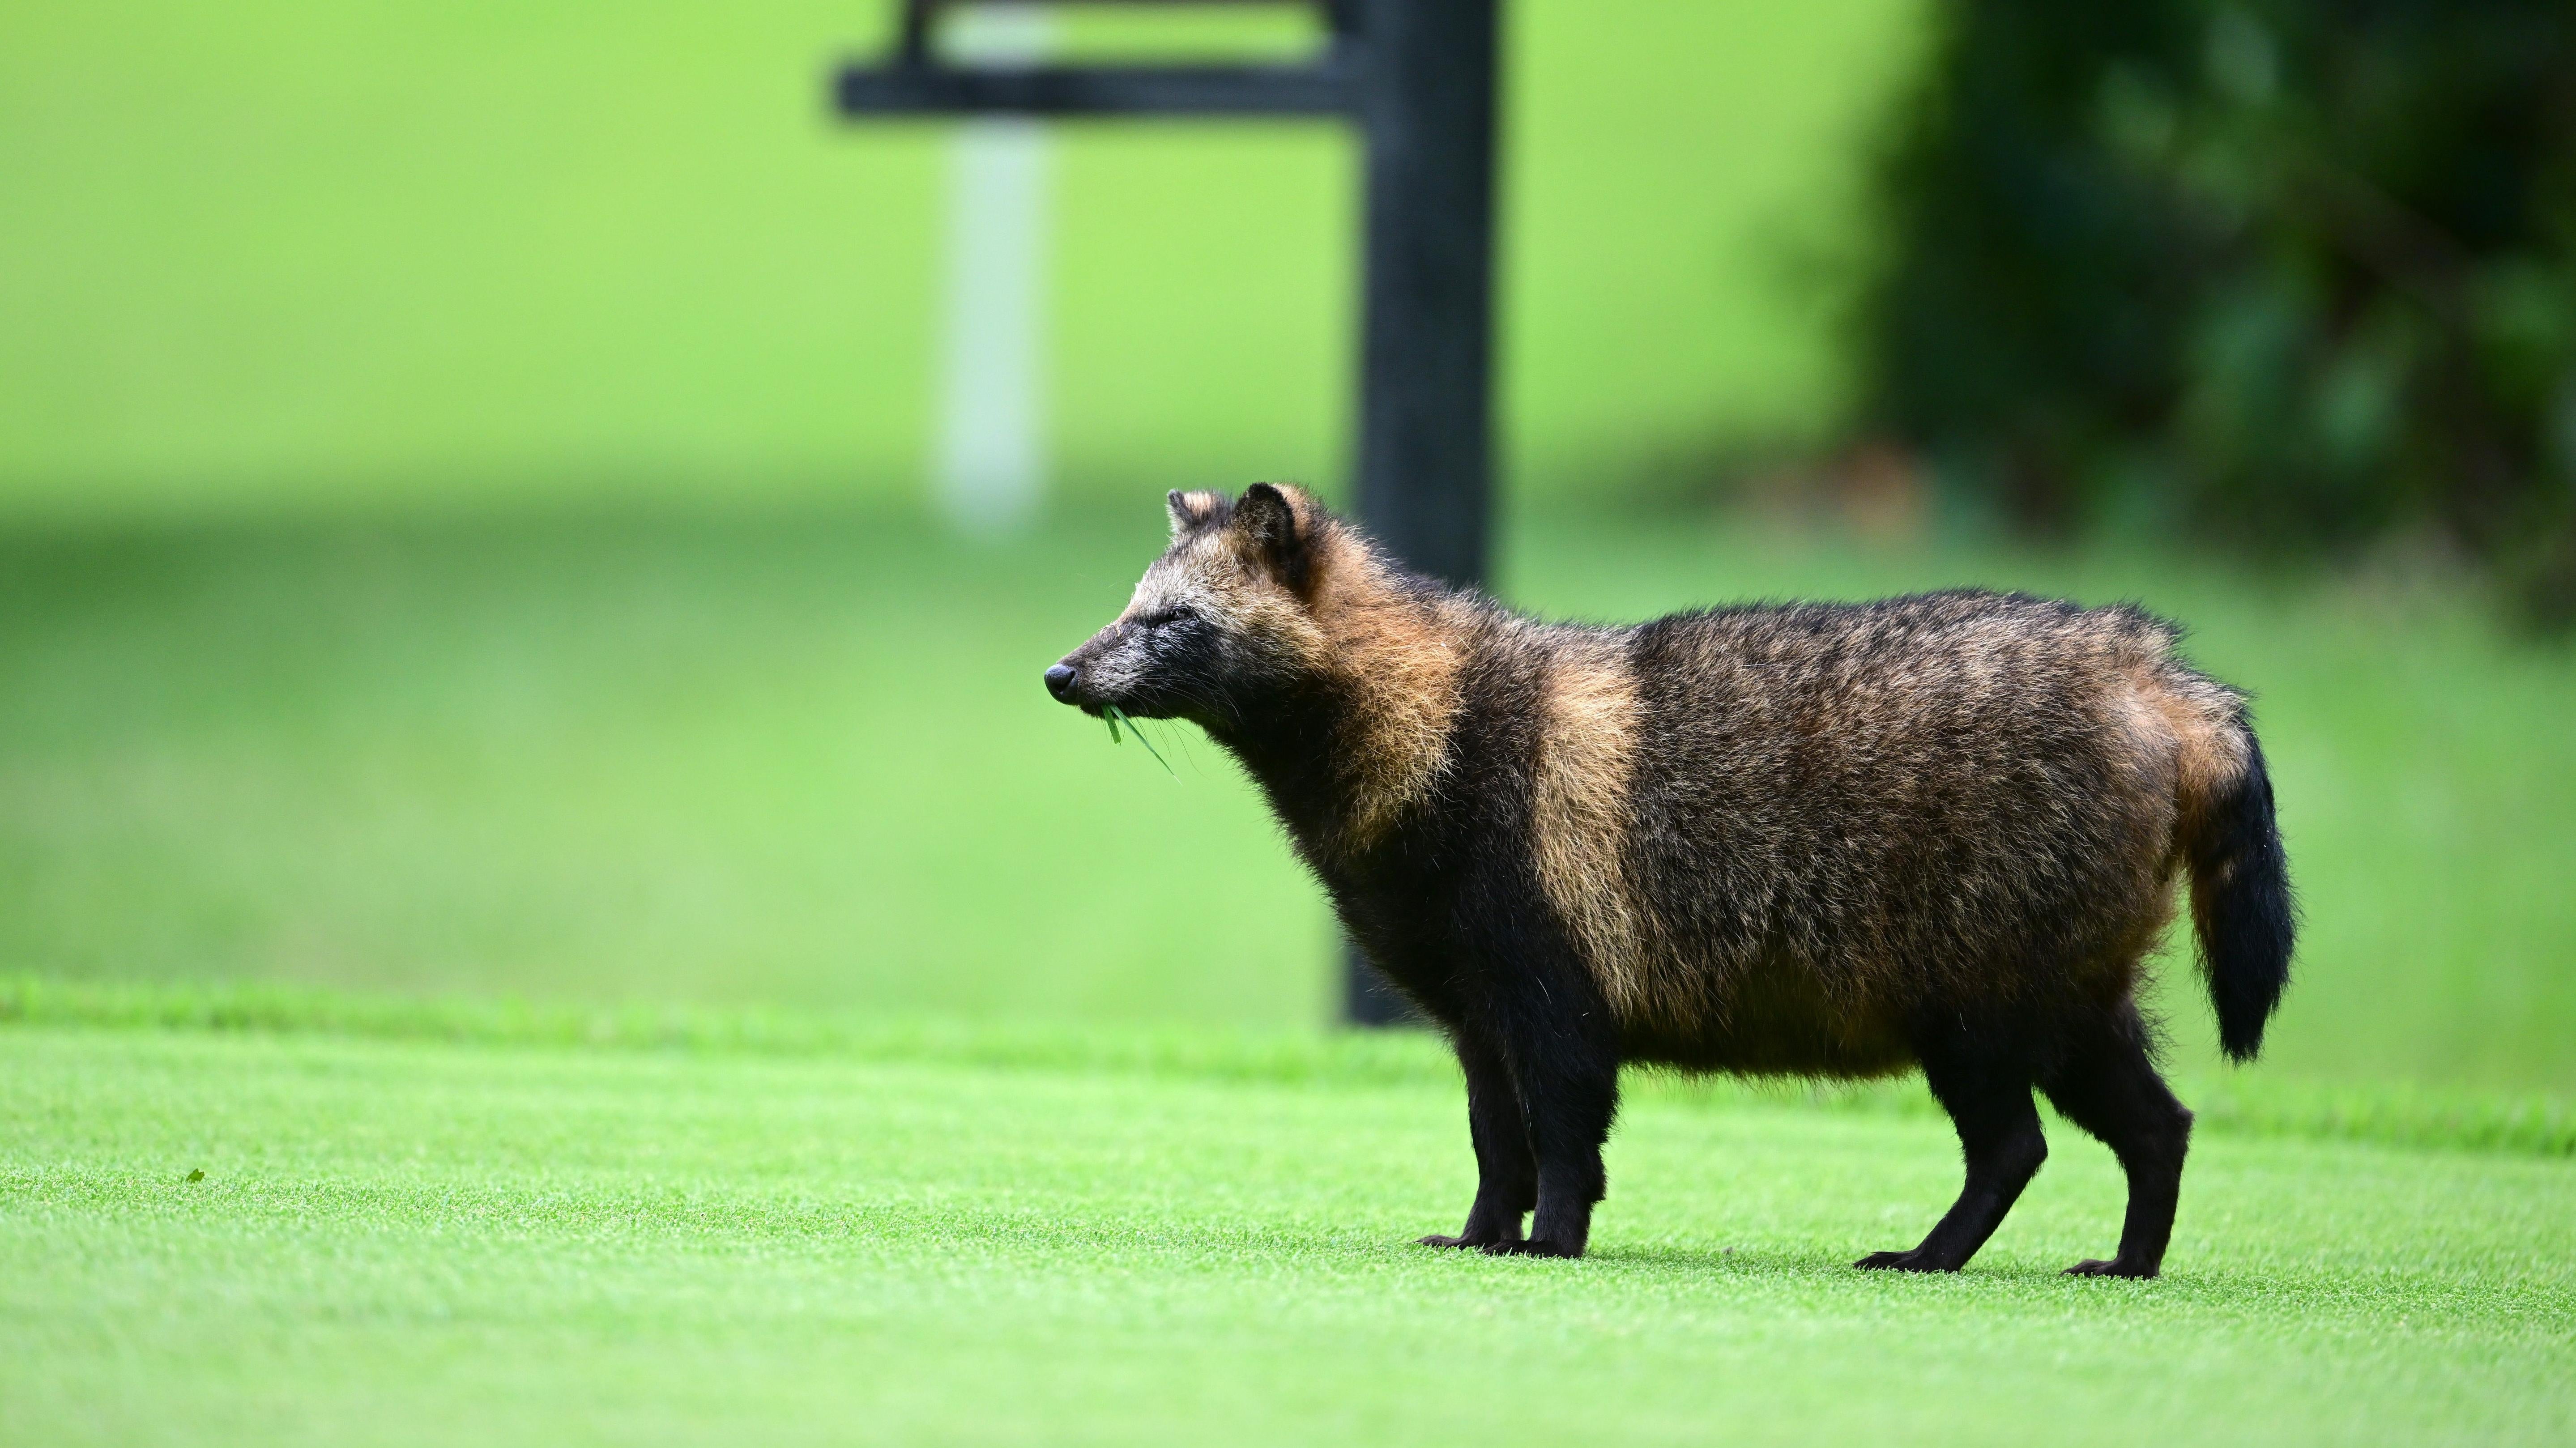 A raccoon dog. (Photo: Atsushi Tomura, Getty Images)